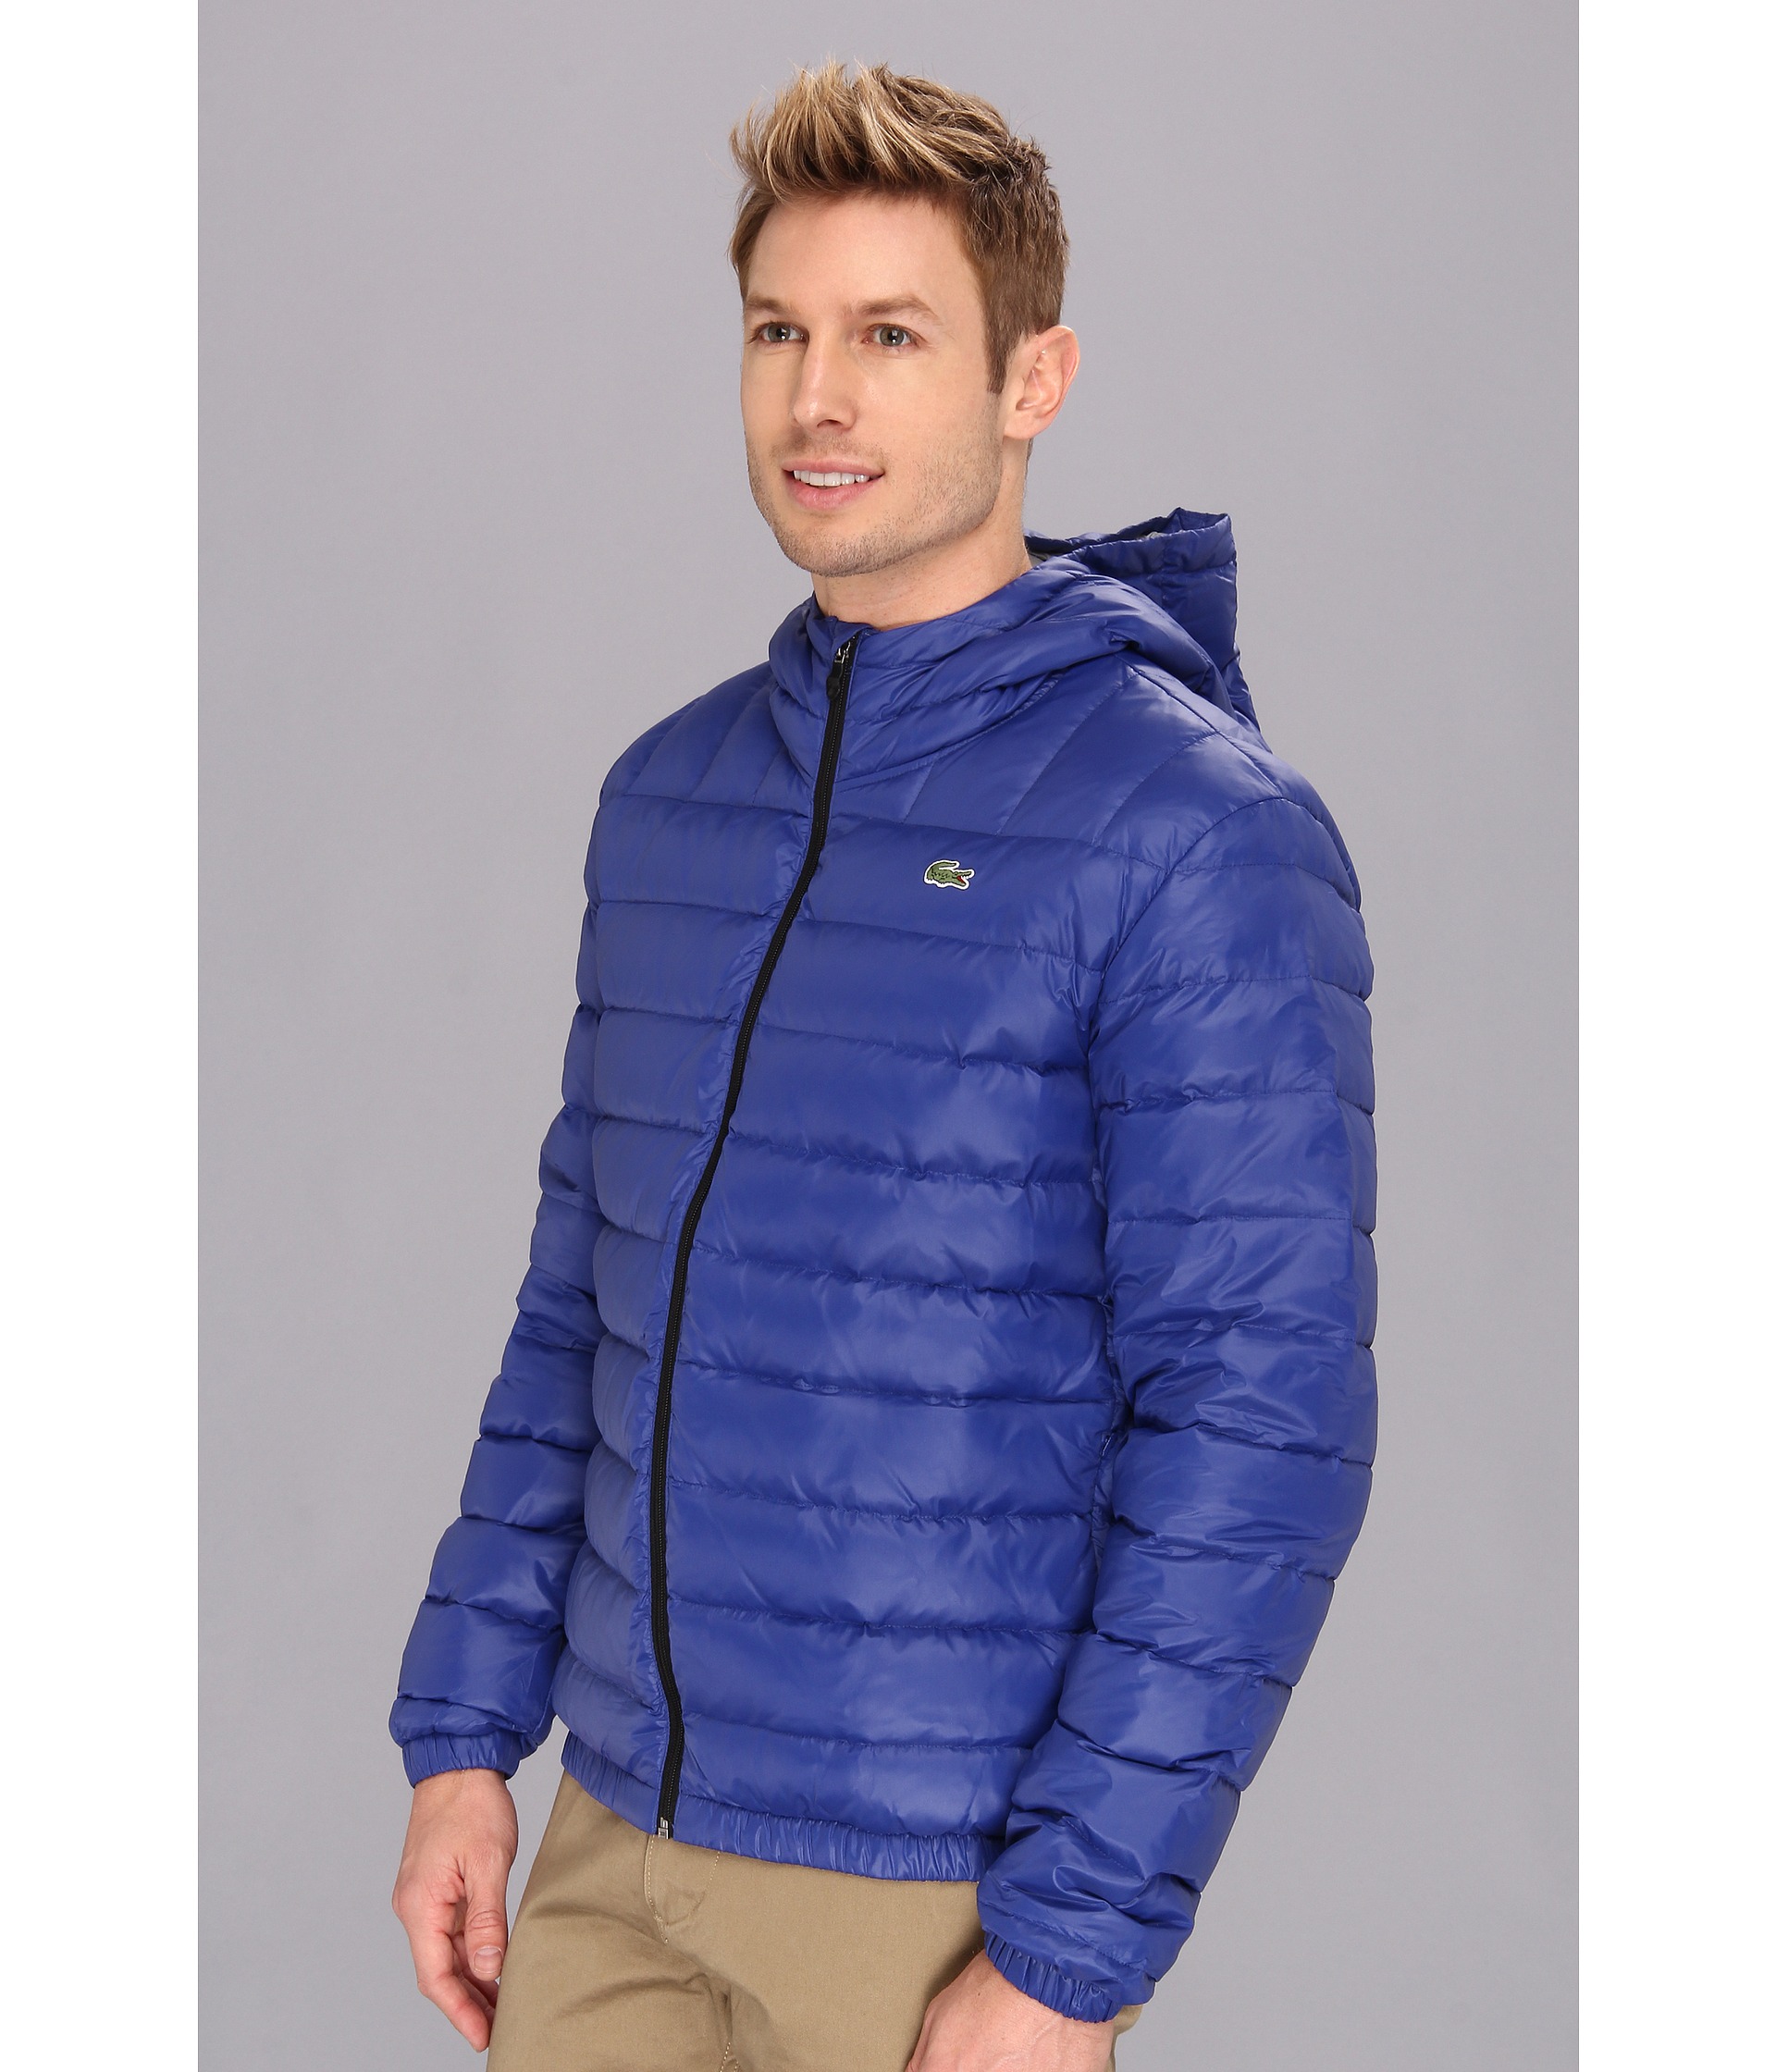 Lacoste Featherweight Packable Down Jacket, Clothing | Shipped Free at ...